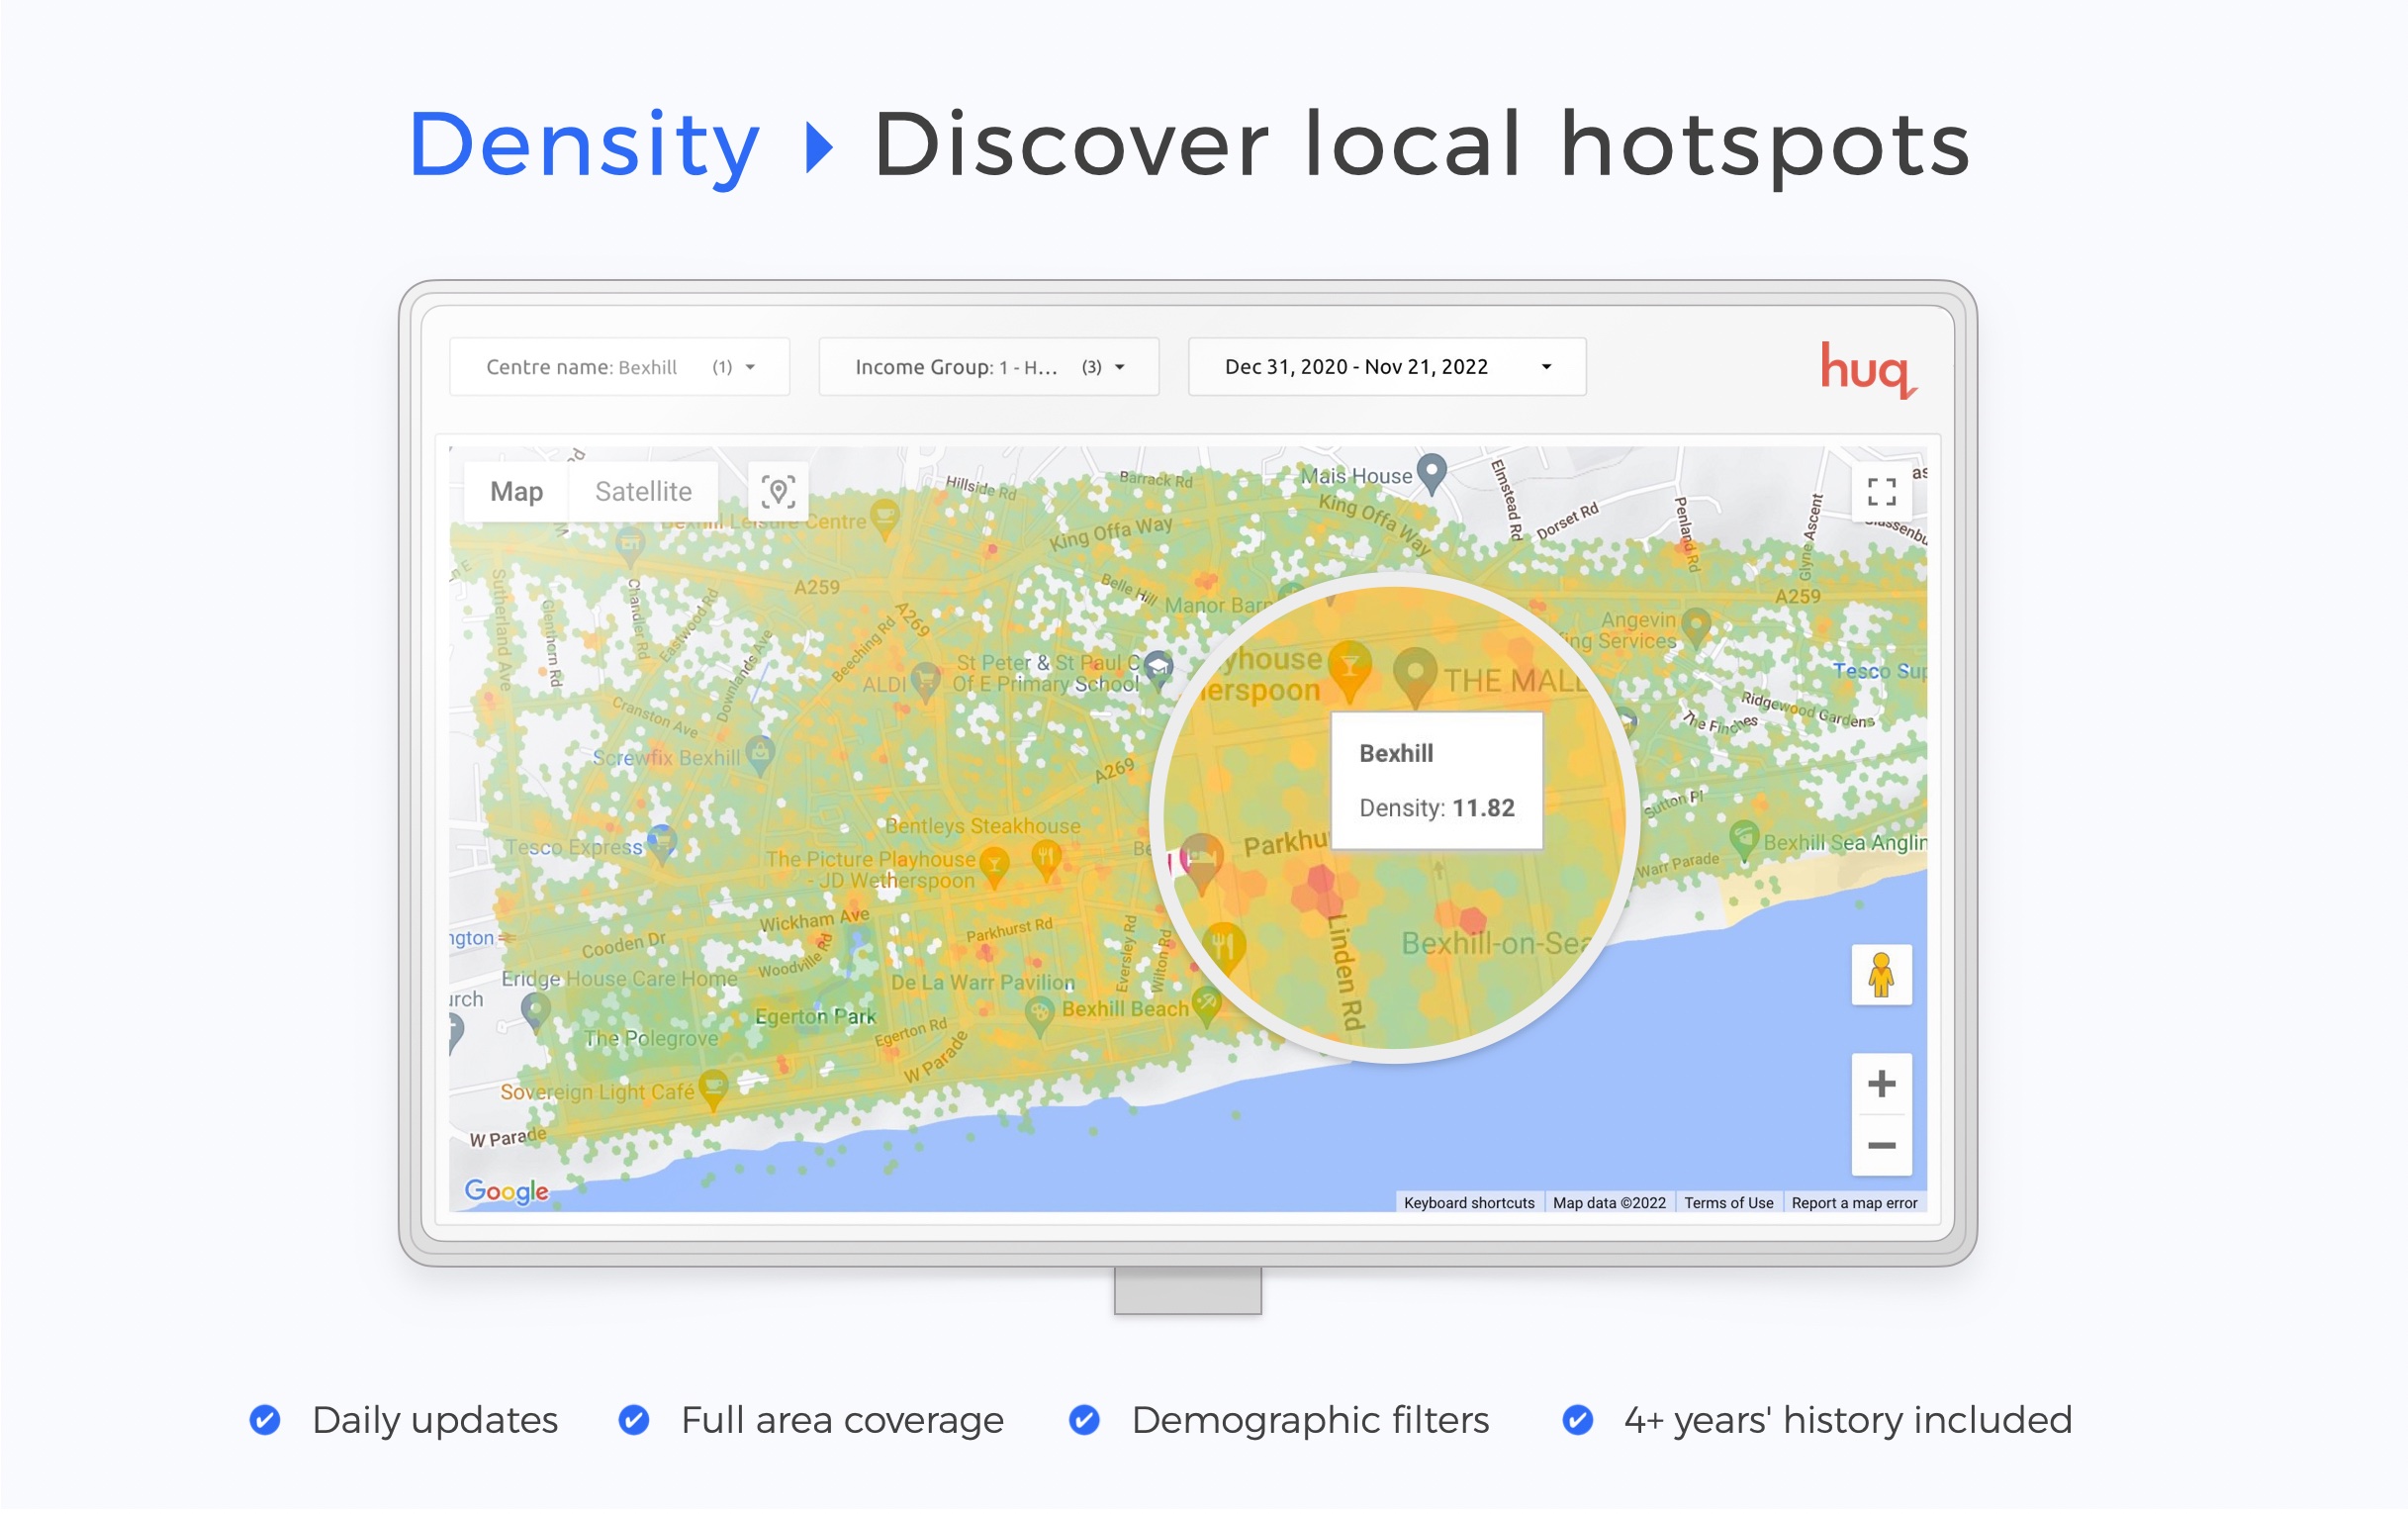 Density monitoring is a visualisation of pedestrian flows and hotspots across whole towns, streets and centres. Density maps are updated daily. Find the most popular parts of towns, streets and green spaces with visitor density monitoring.